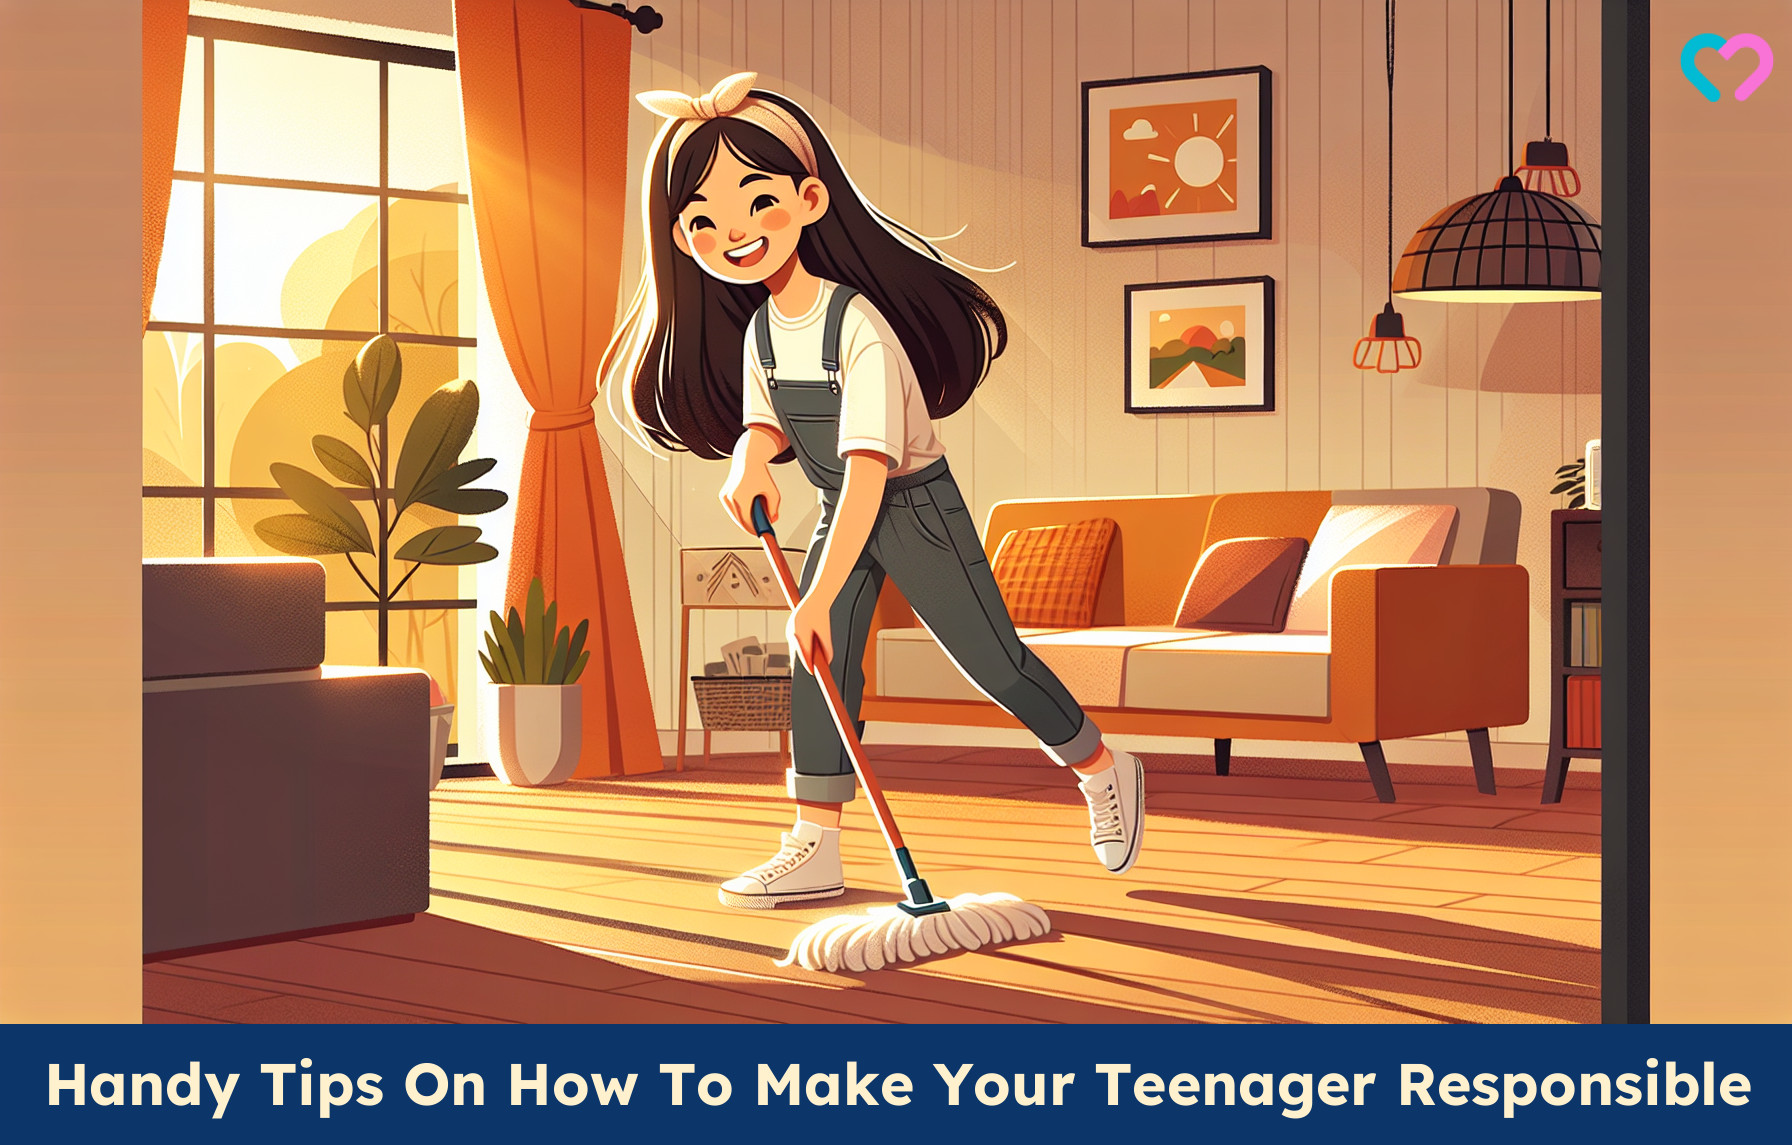 How To Make Your Teenager Responsible_illustration